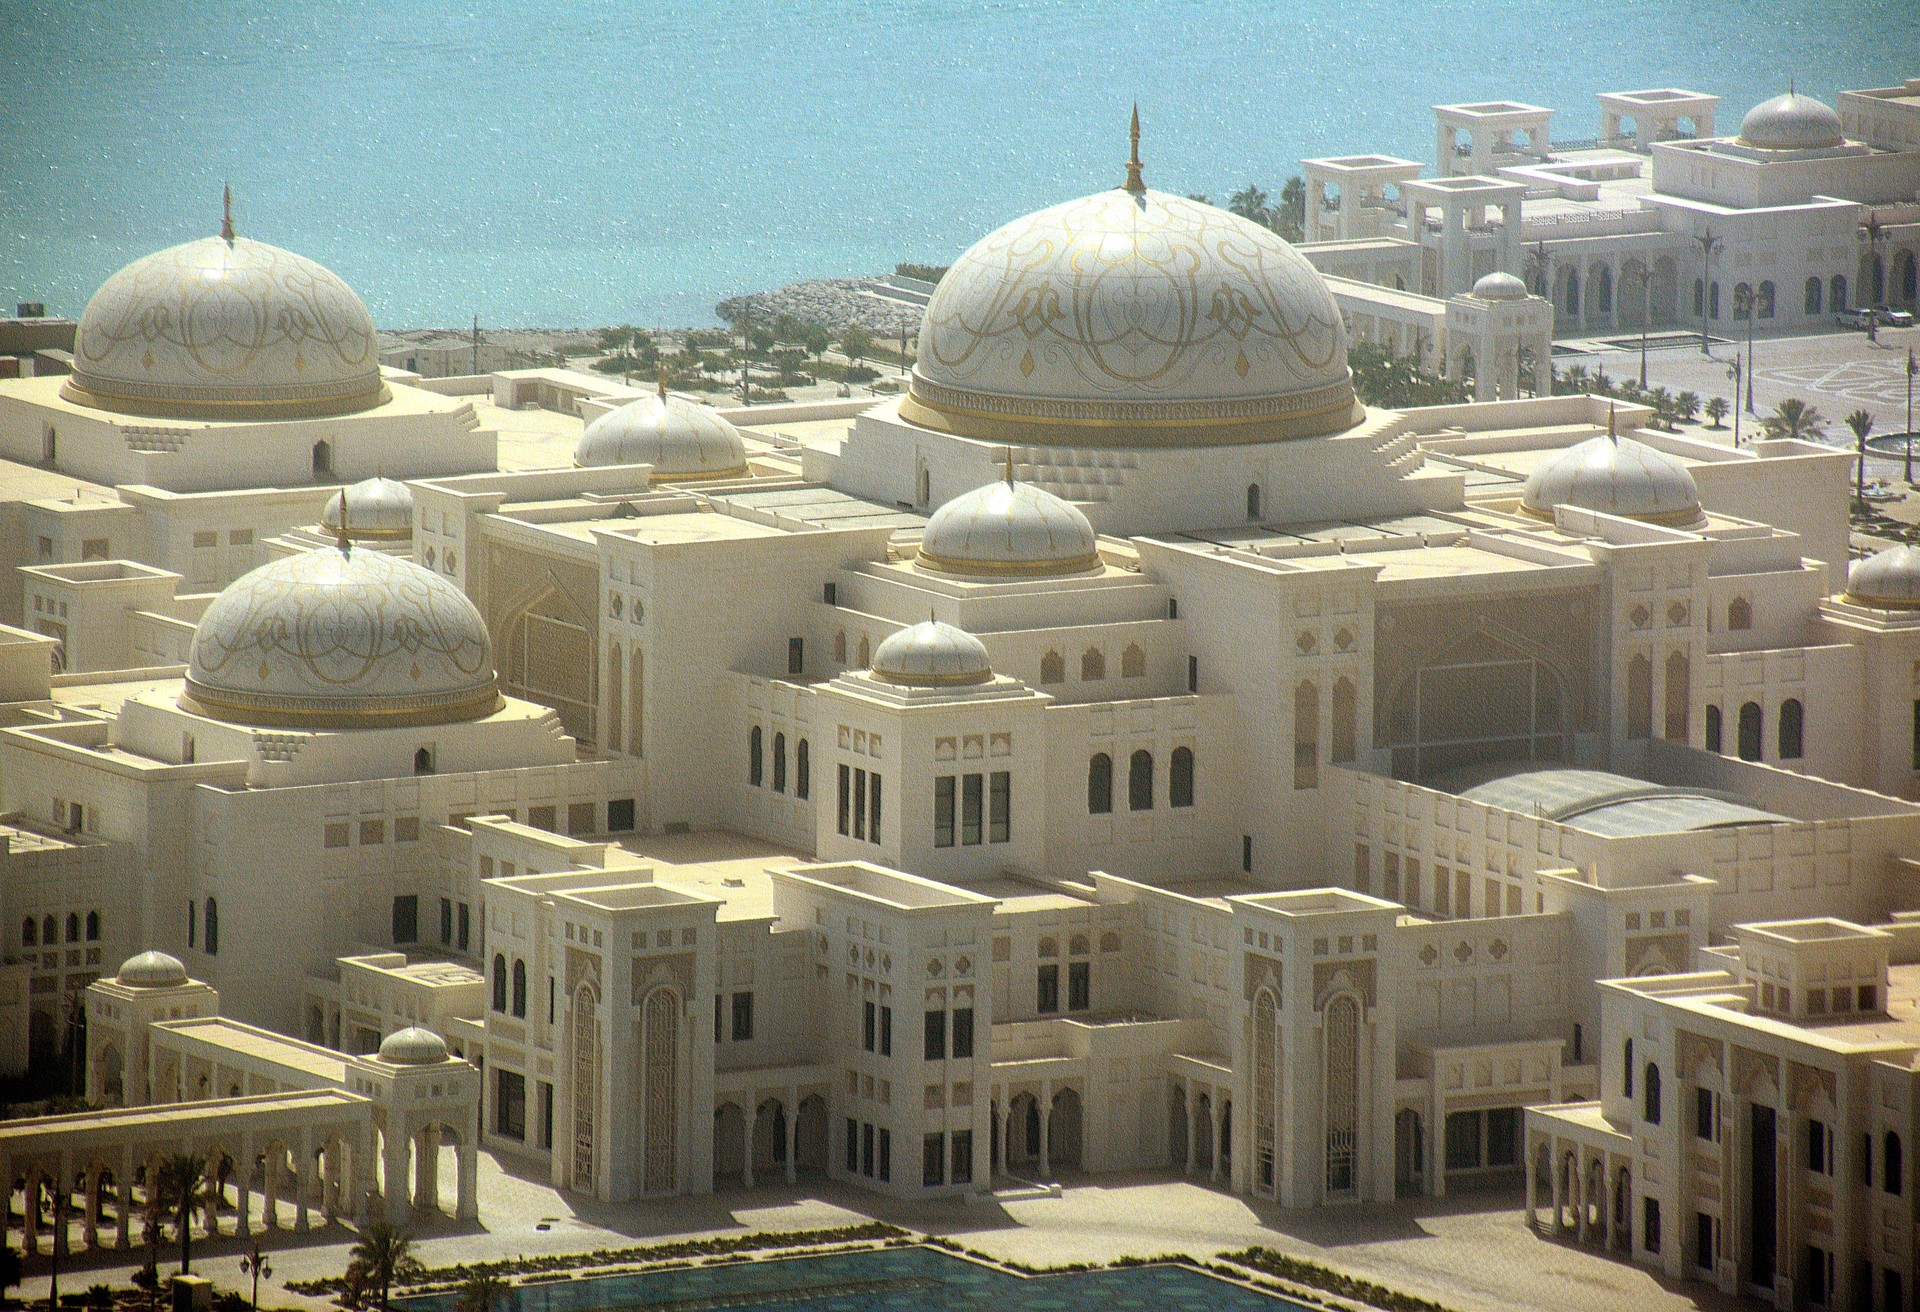 The majestic UAE Presidential Palace in Abu Dhabi, overlooking the Persian Gulf, United Arab Emirates